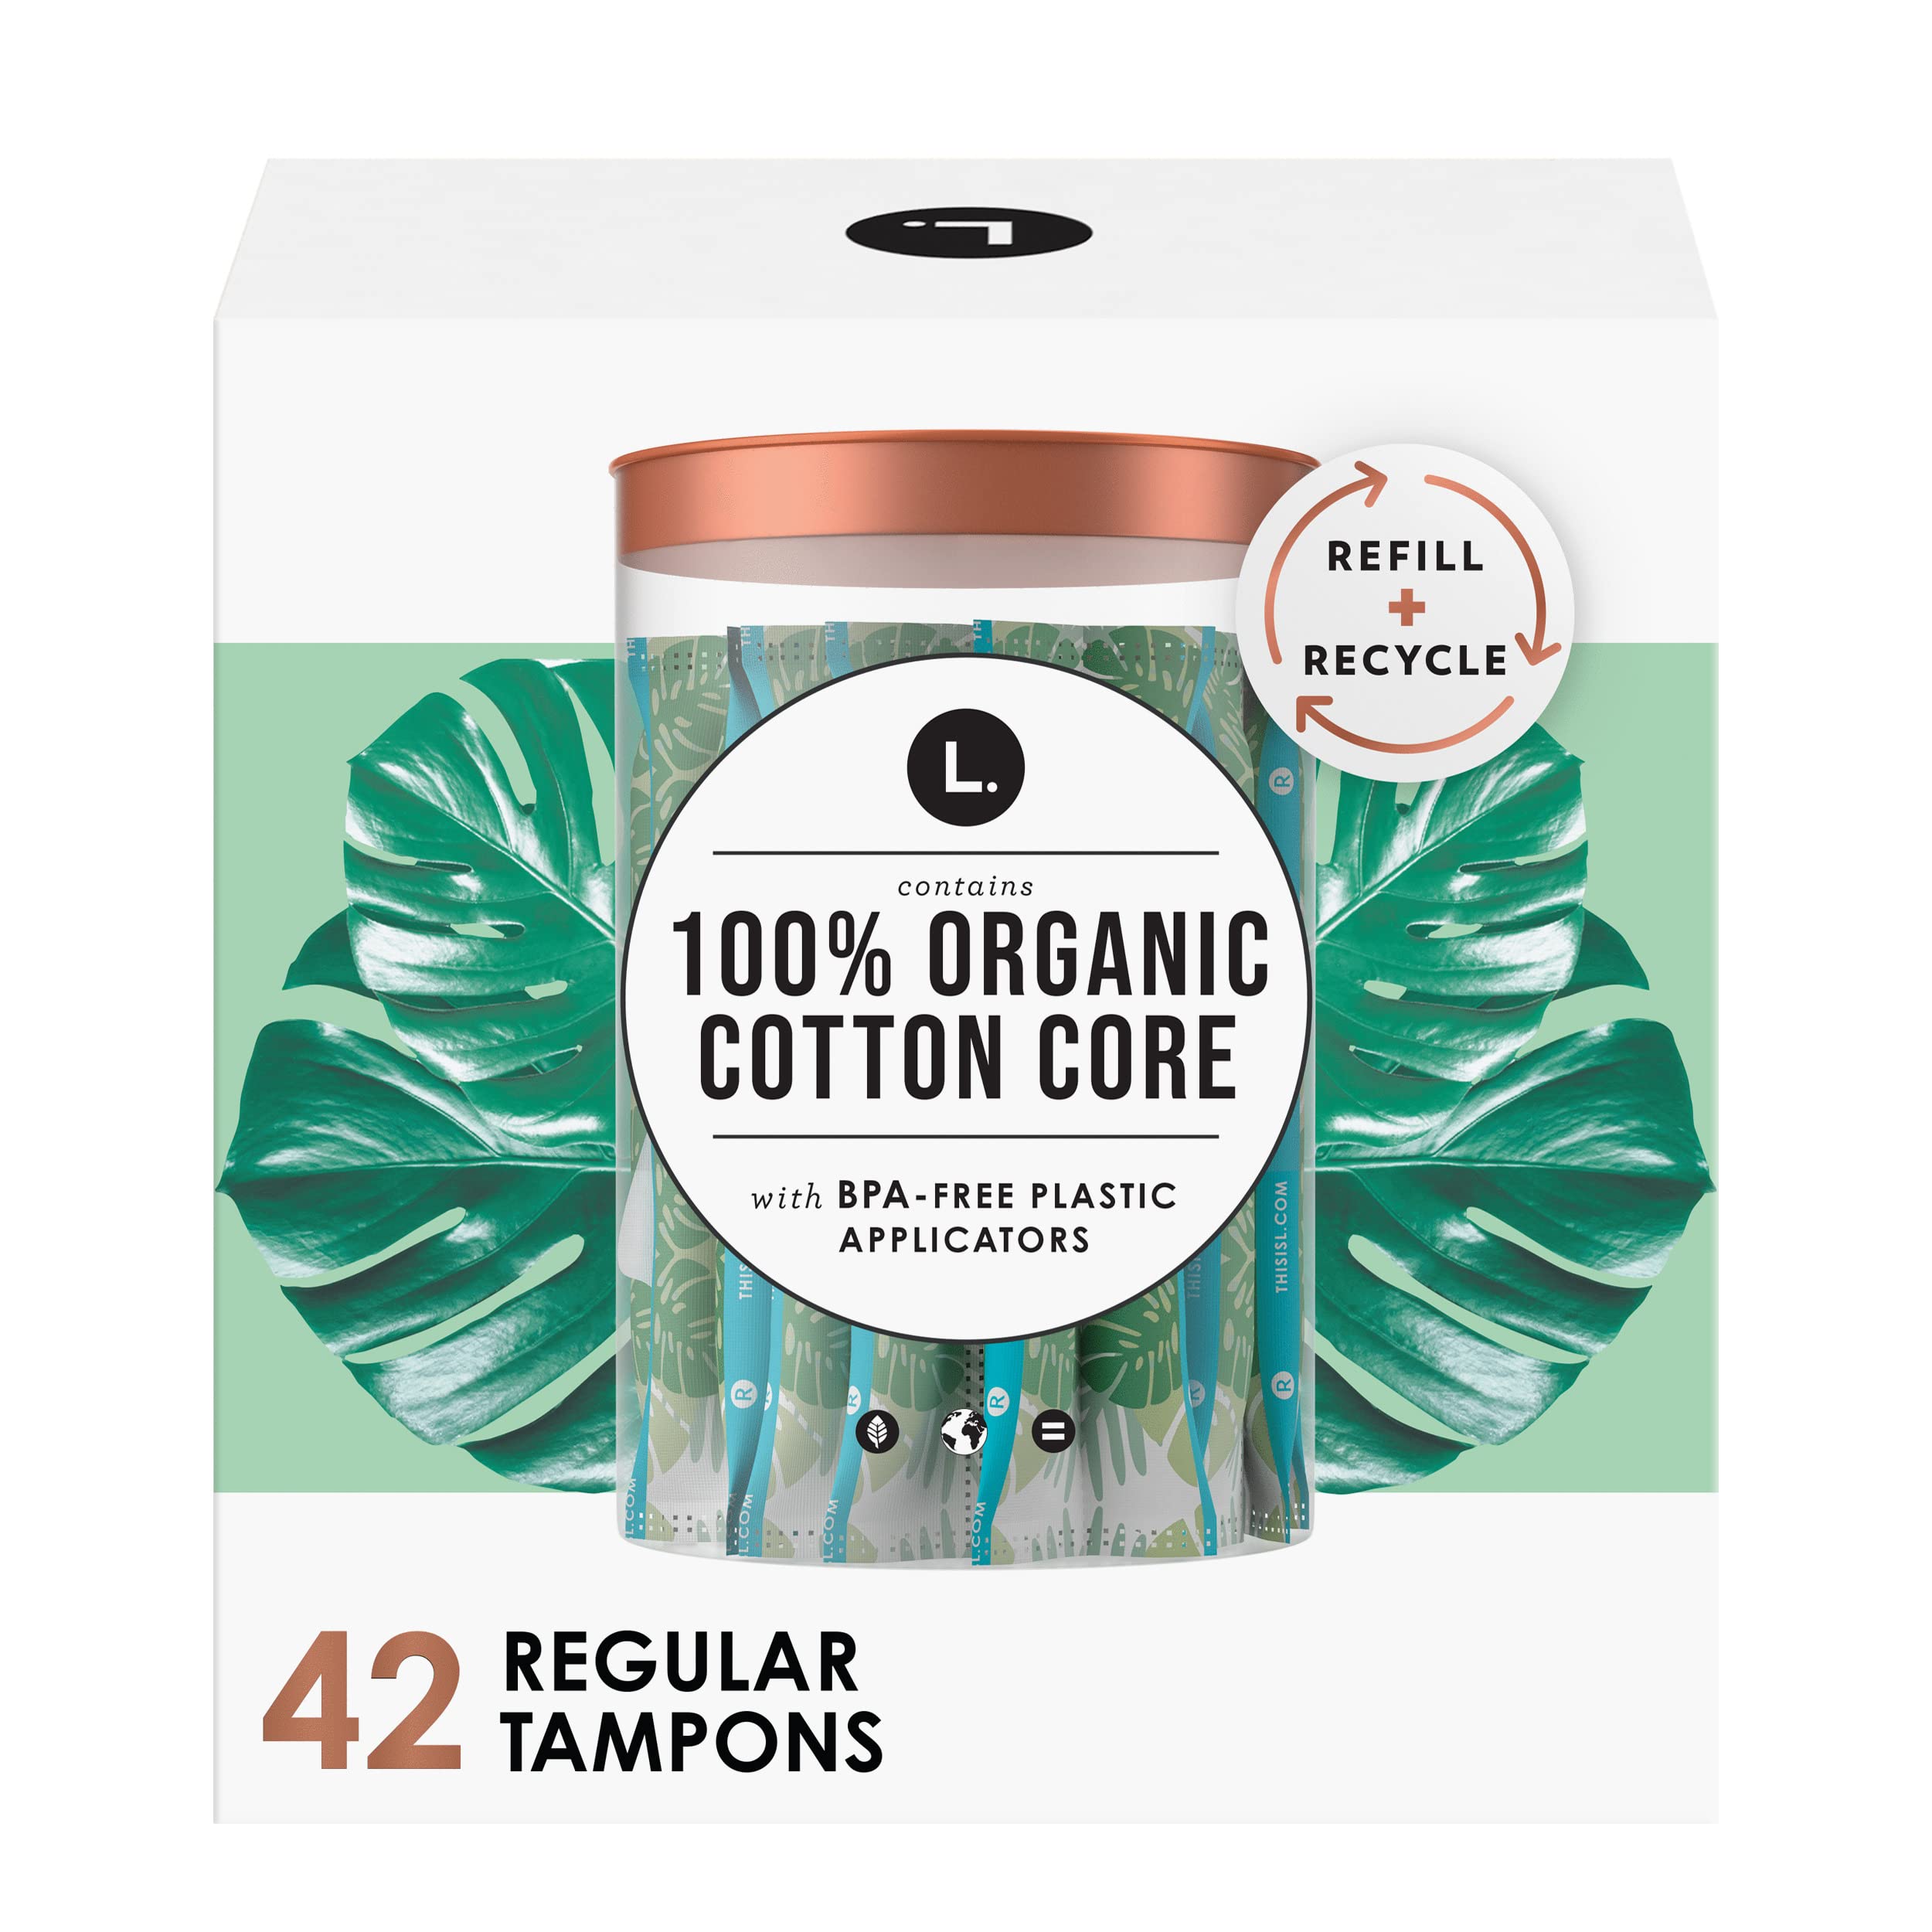 L. Organic Cotton Tampons - Regular 42 Count x 2 Packs (84 Count Total)